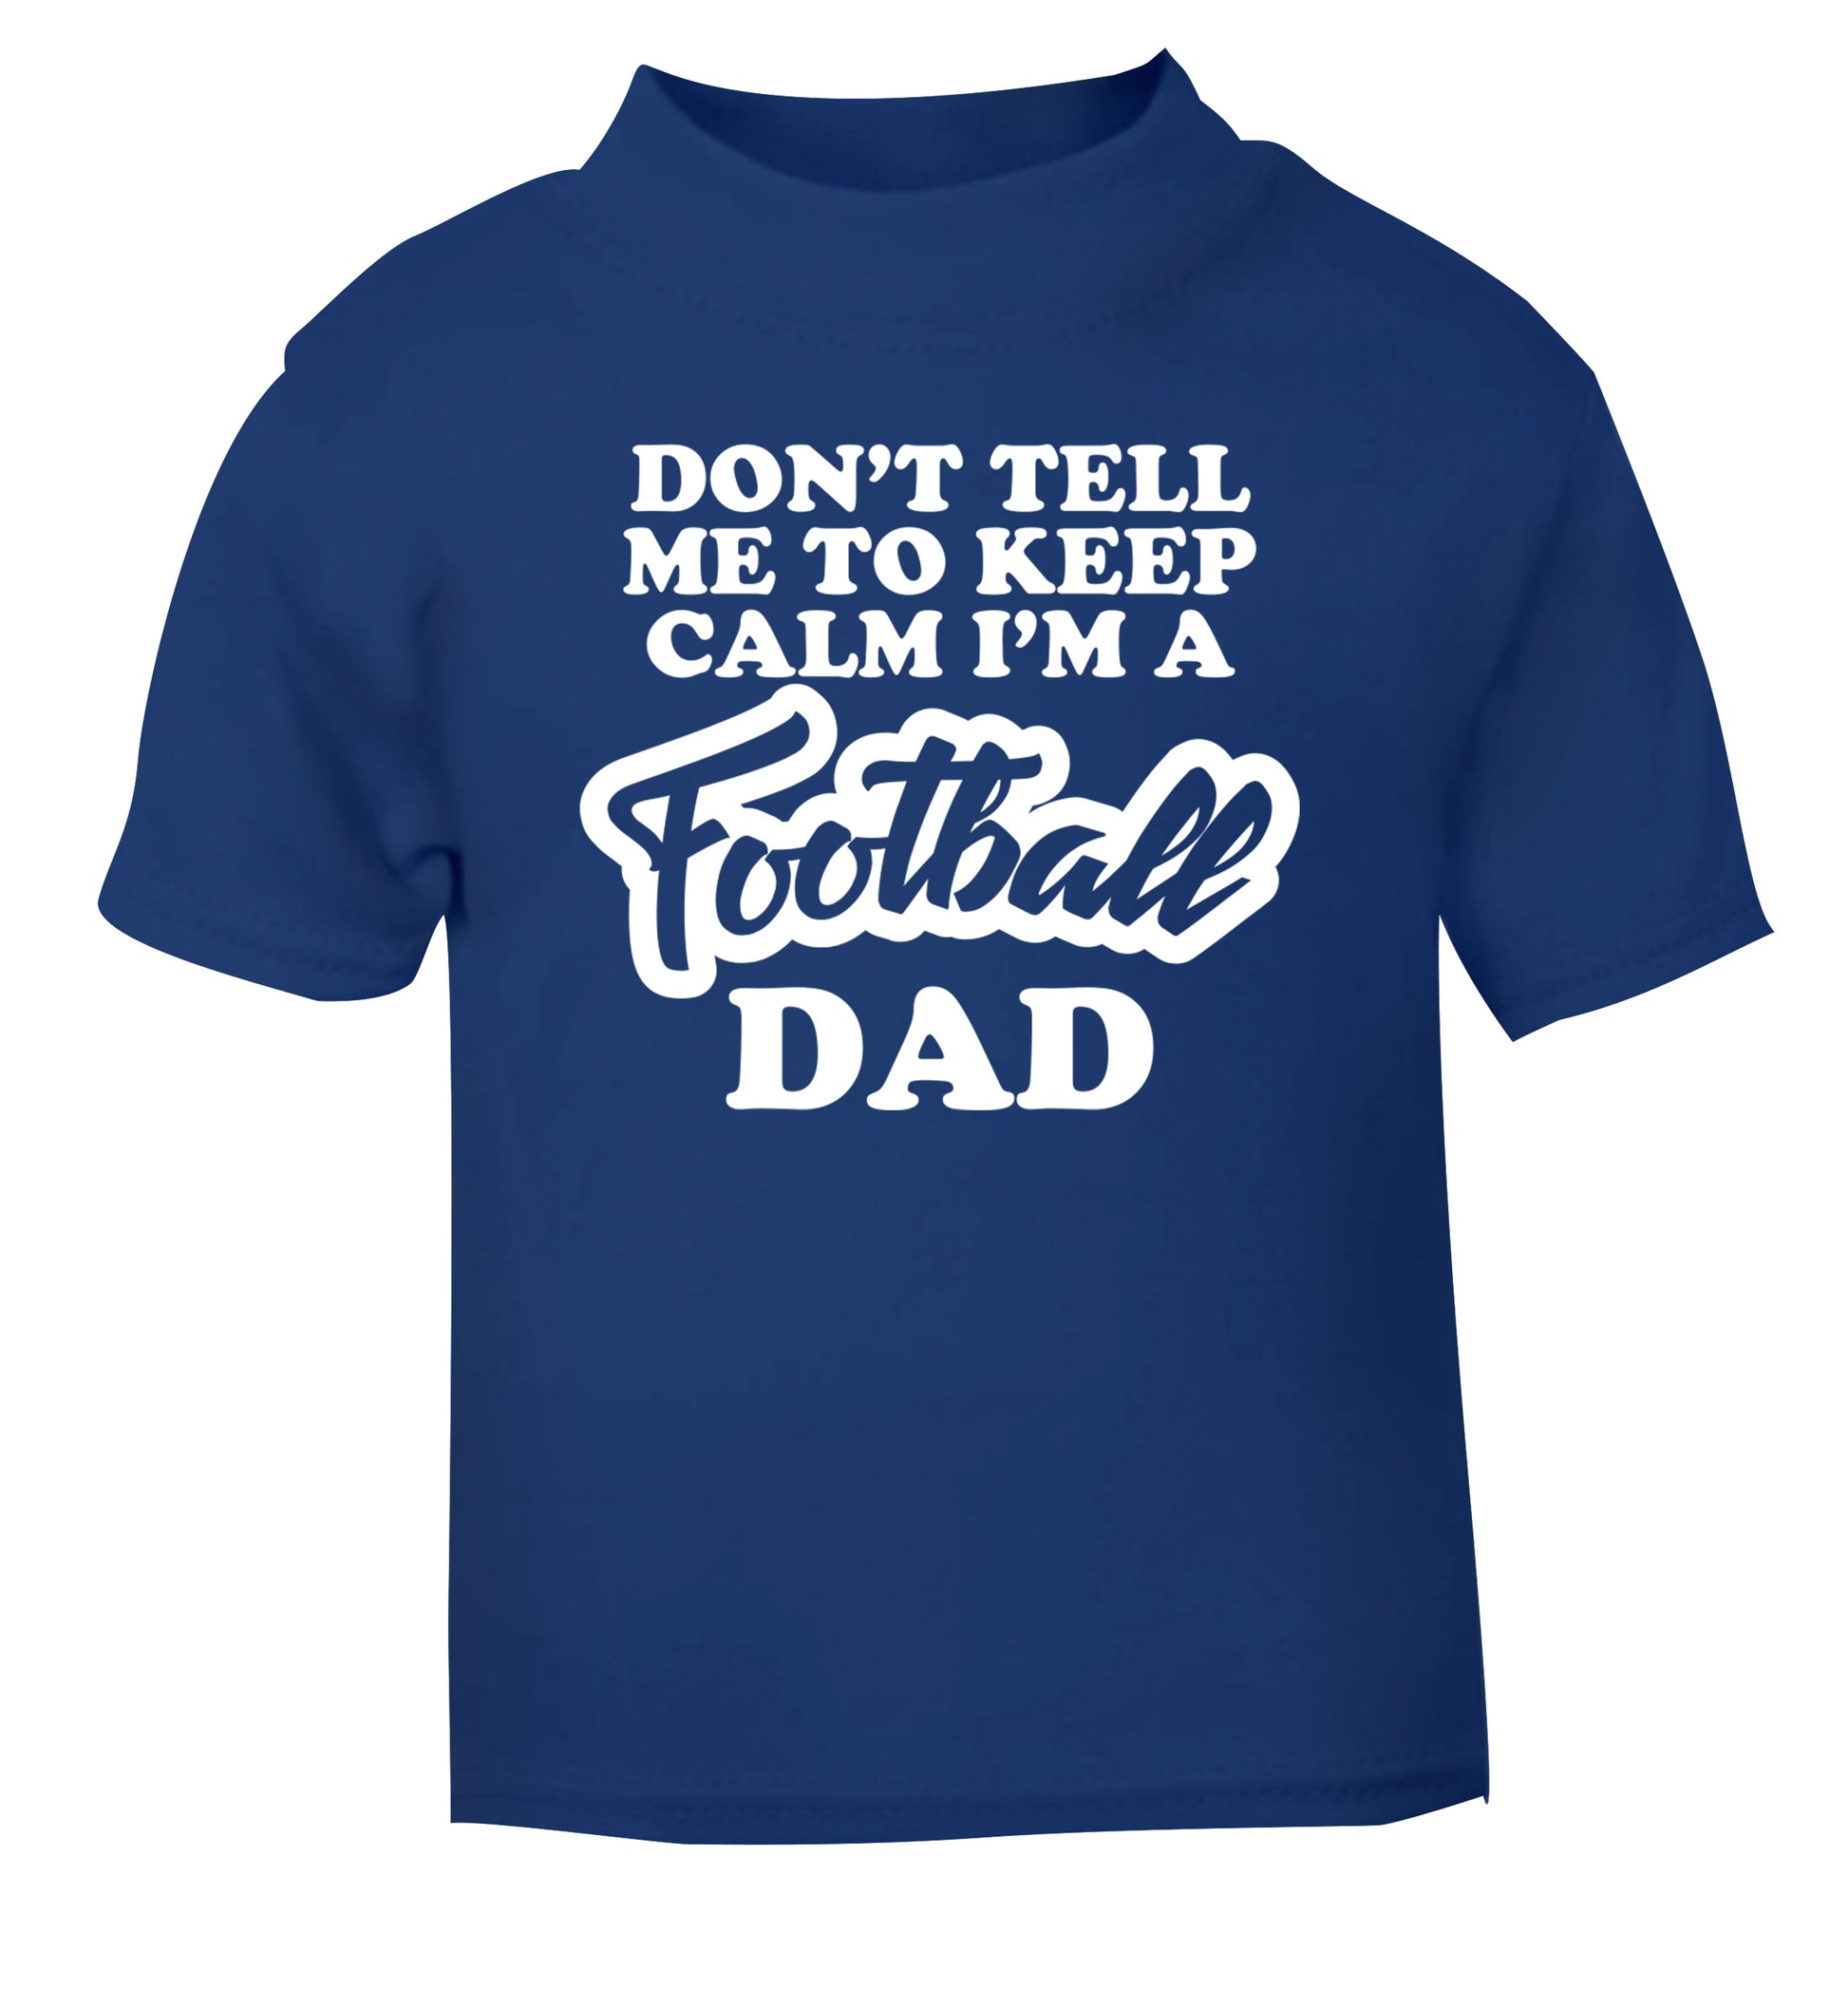 Don't tell me to keep calm I'm a football dad blue Baby Toddler Tshirt 2 Years